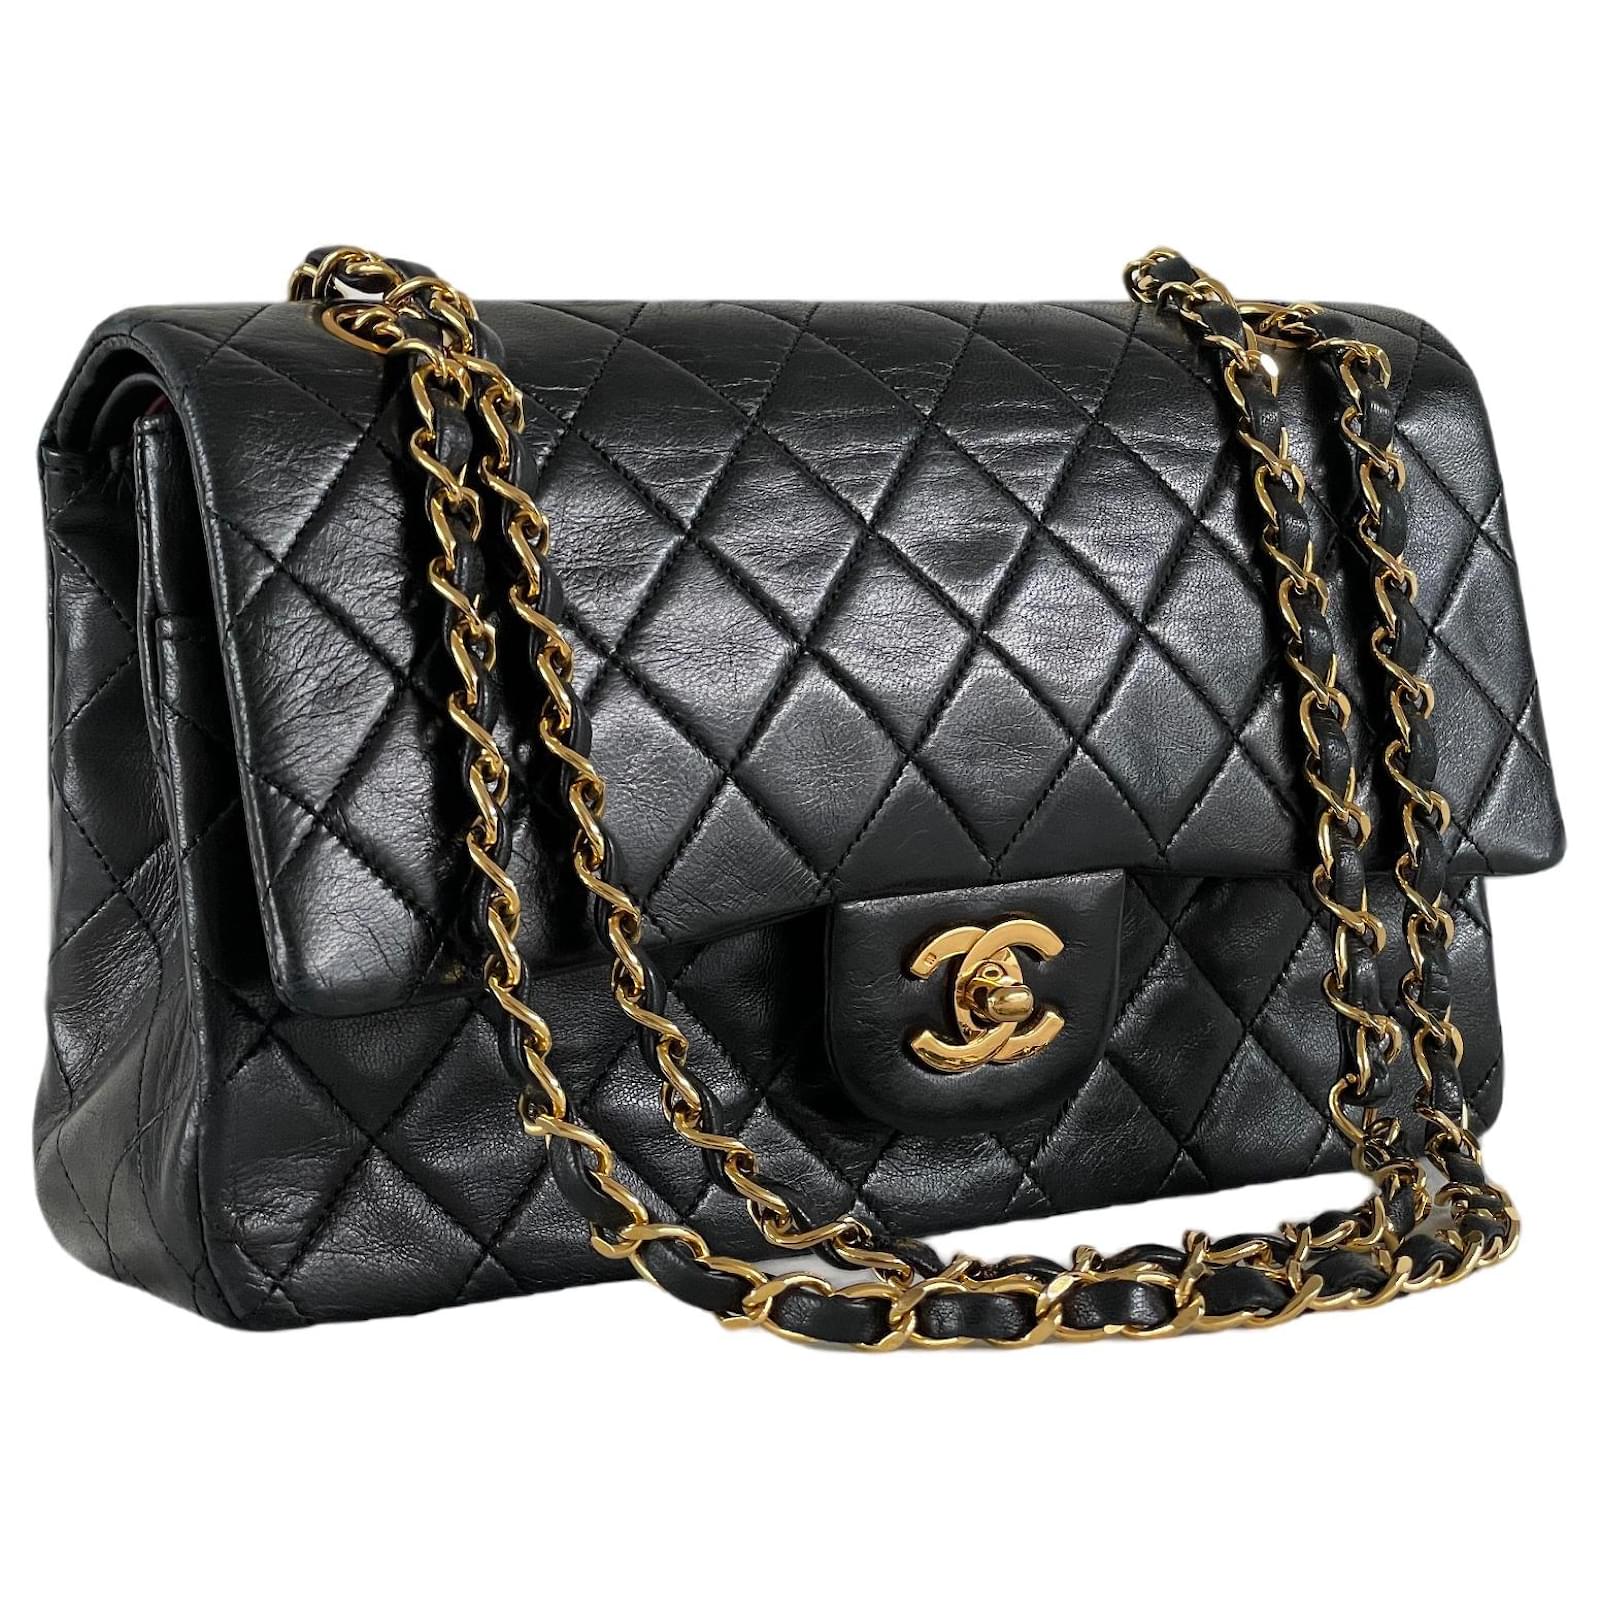 Timeless/classique leather crossbody bag Chanel Black in Leather - 36517919